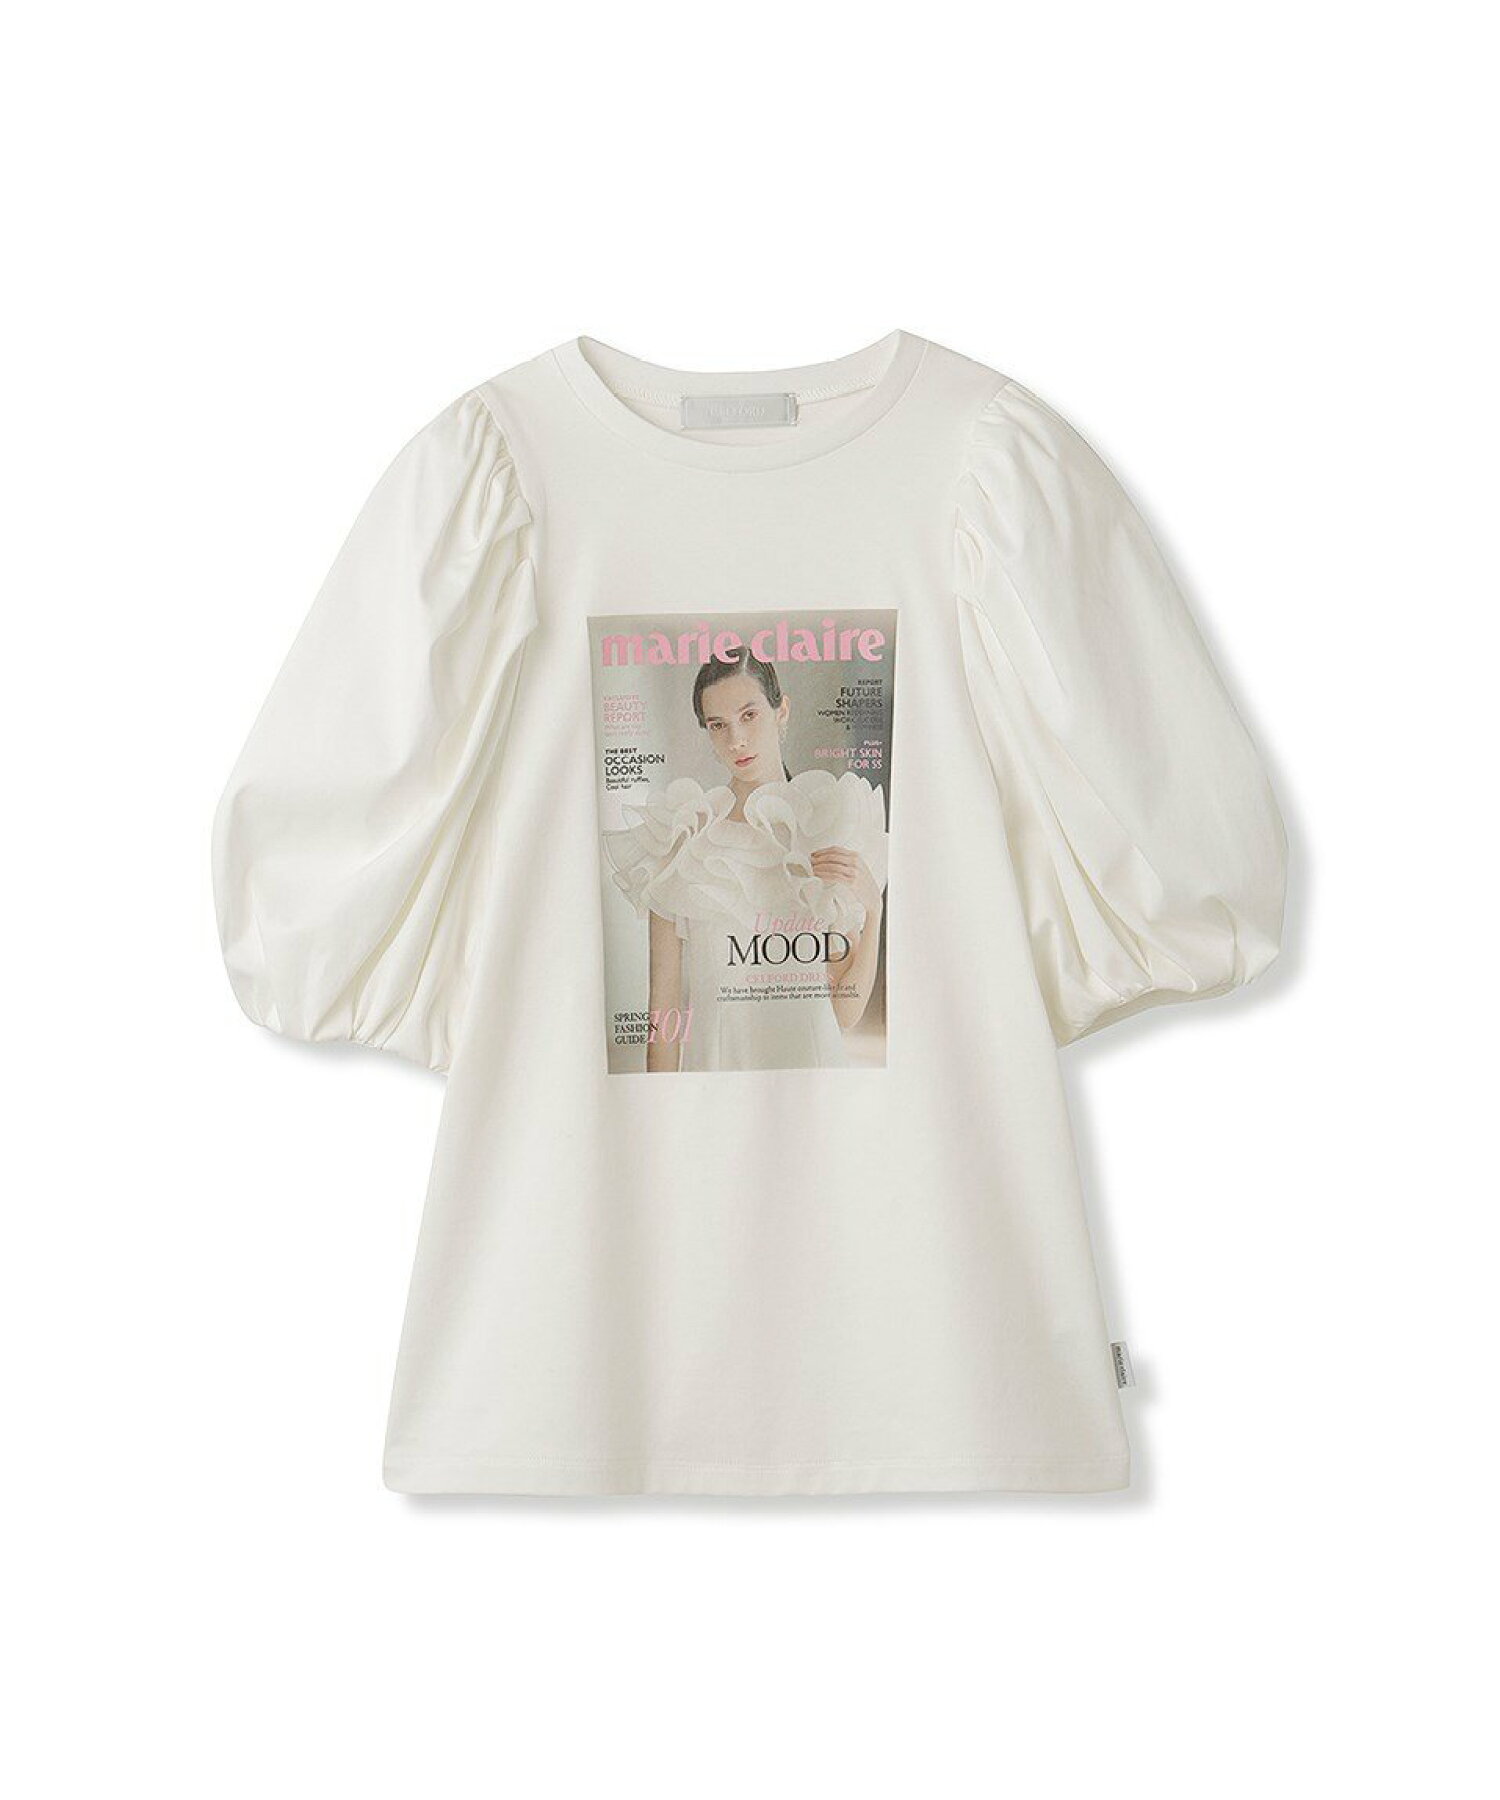 marie claire*CELFORD Collaboration Tシャツ